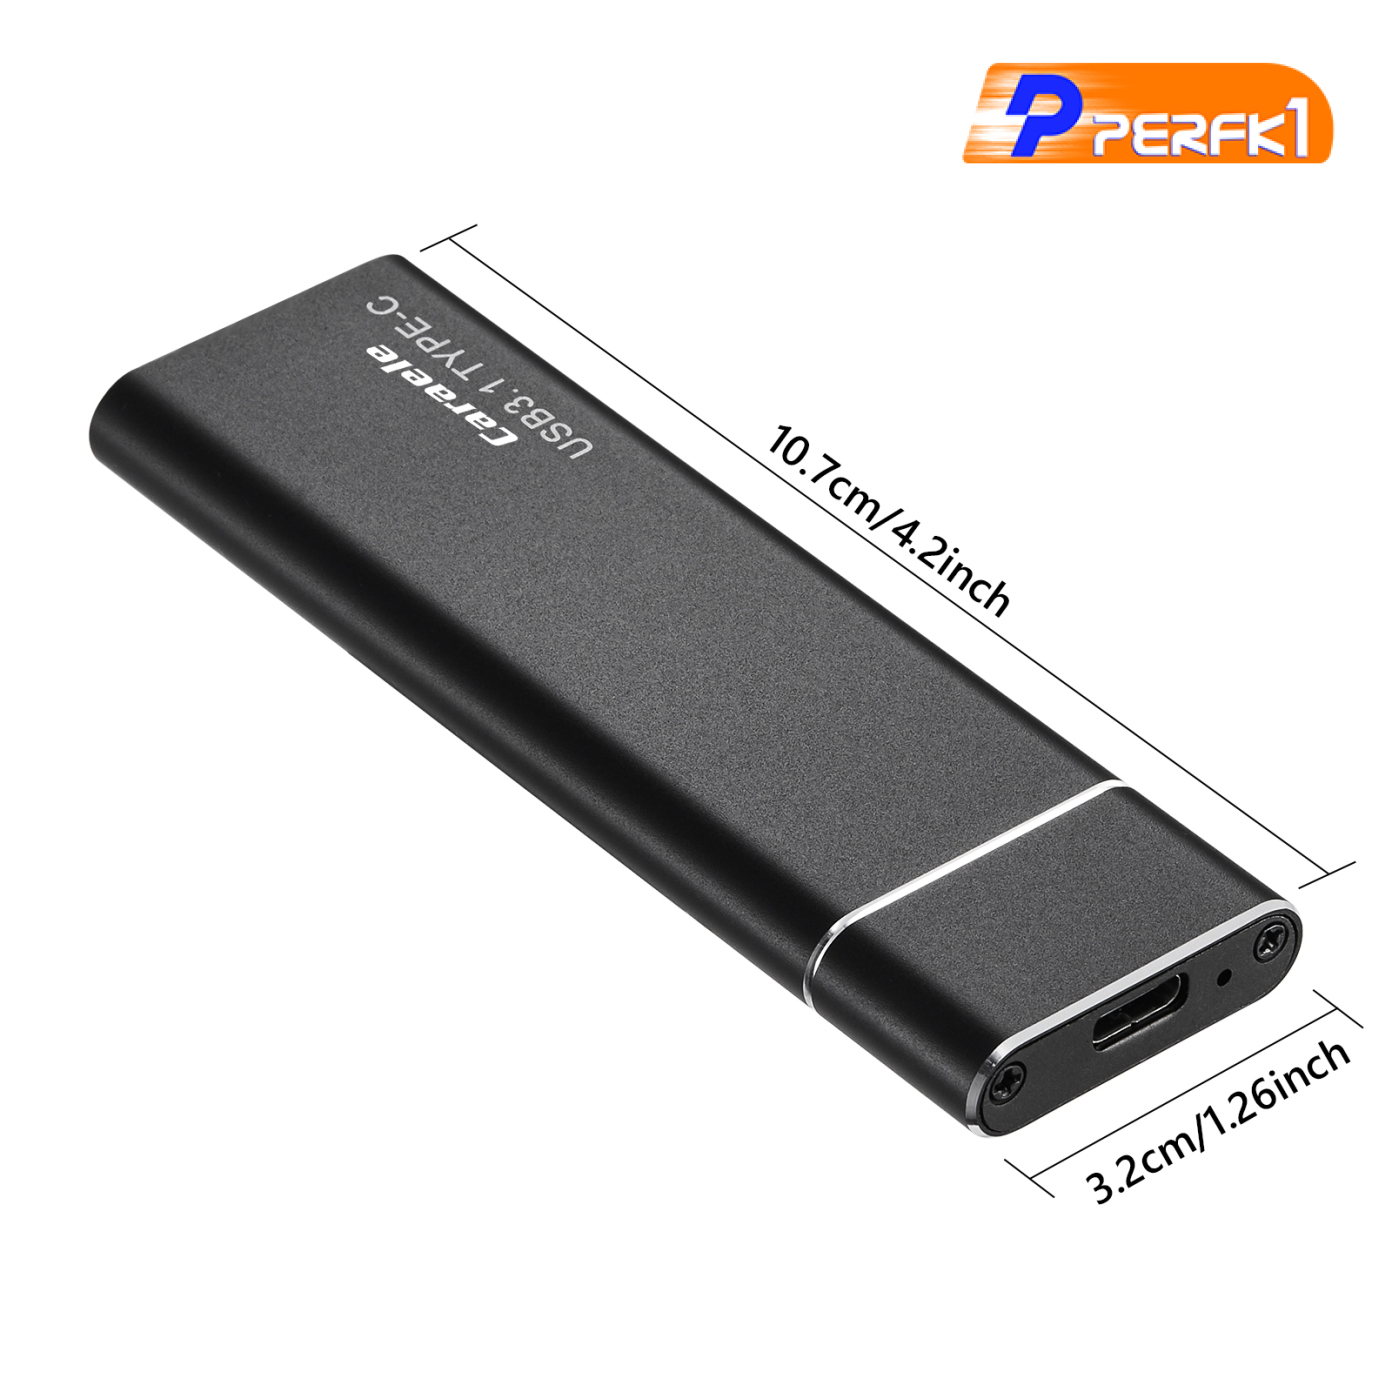 Ổ Cứng Ssd Usb 3.1 1t Cho Android Tablet Laptops